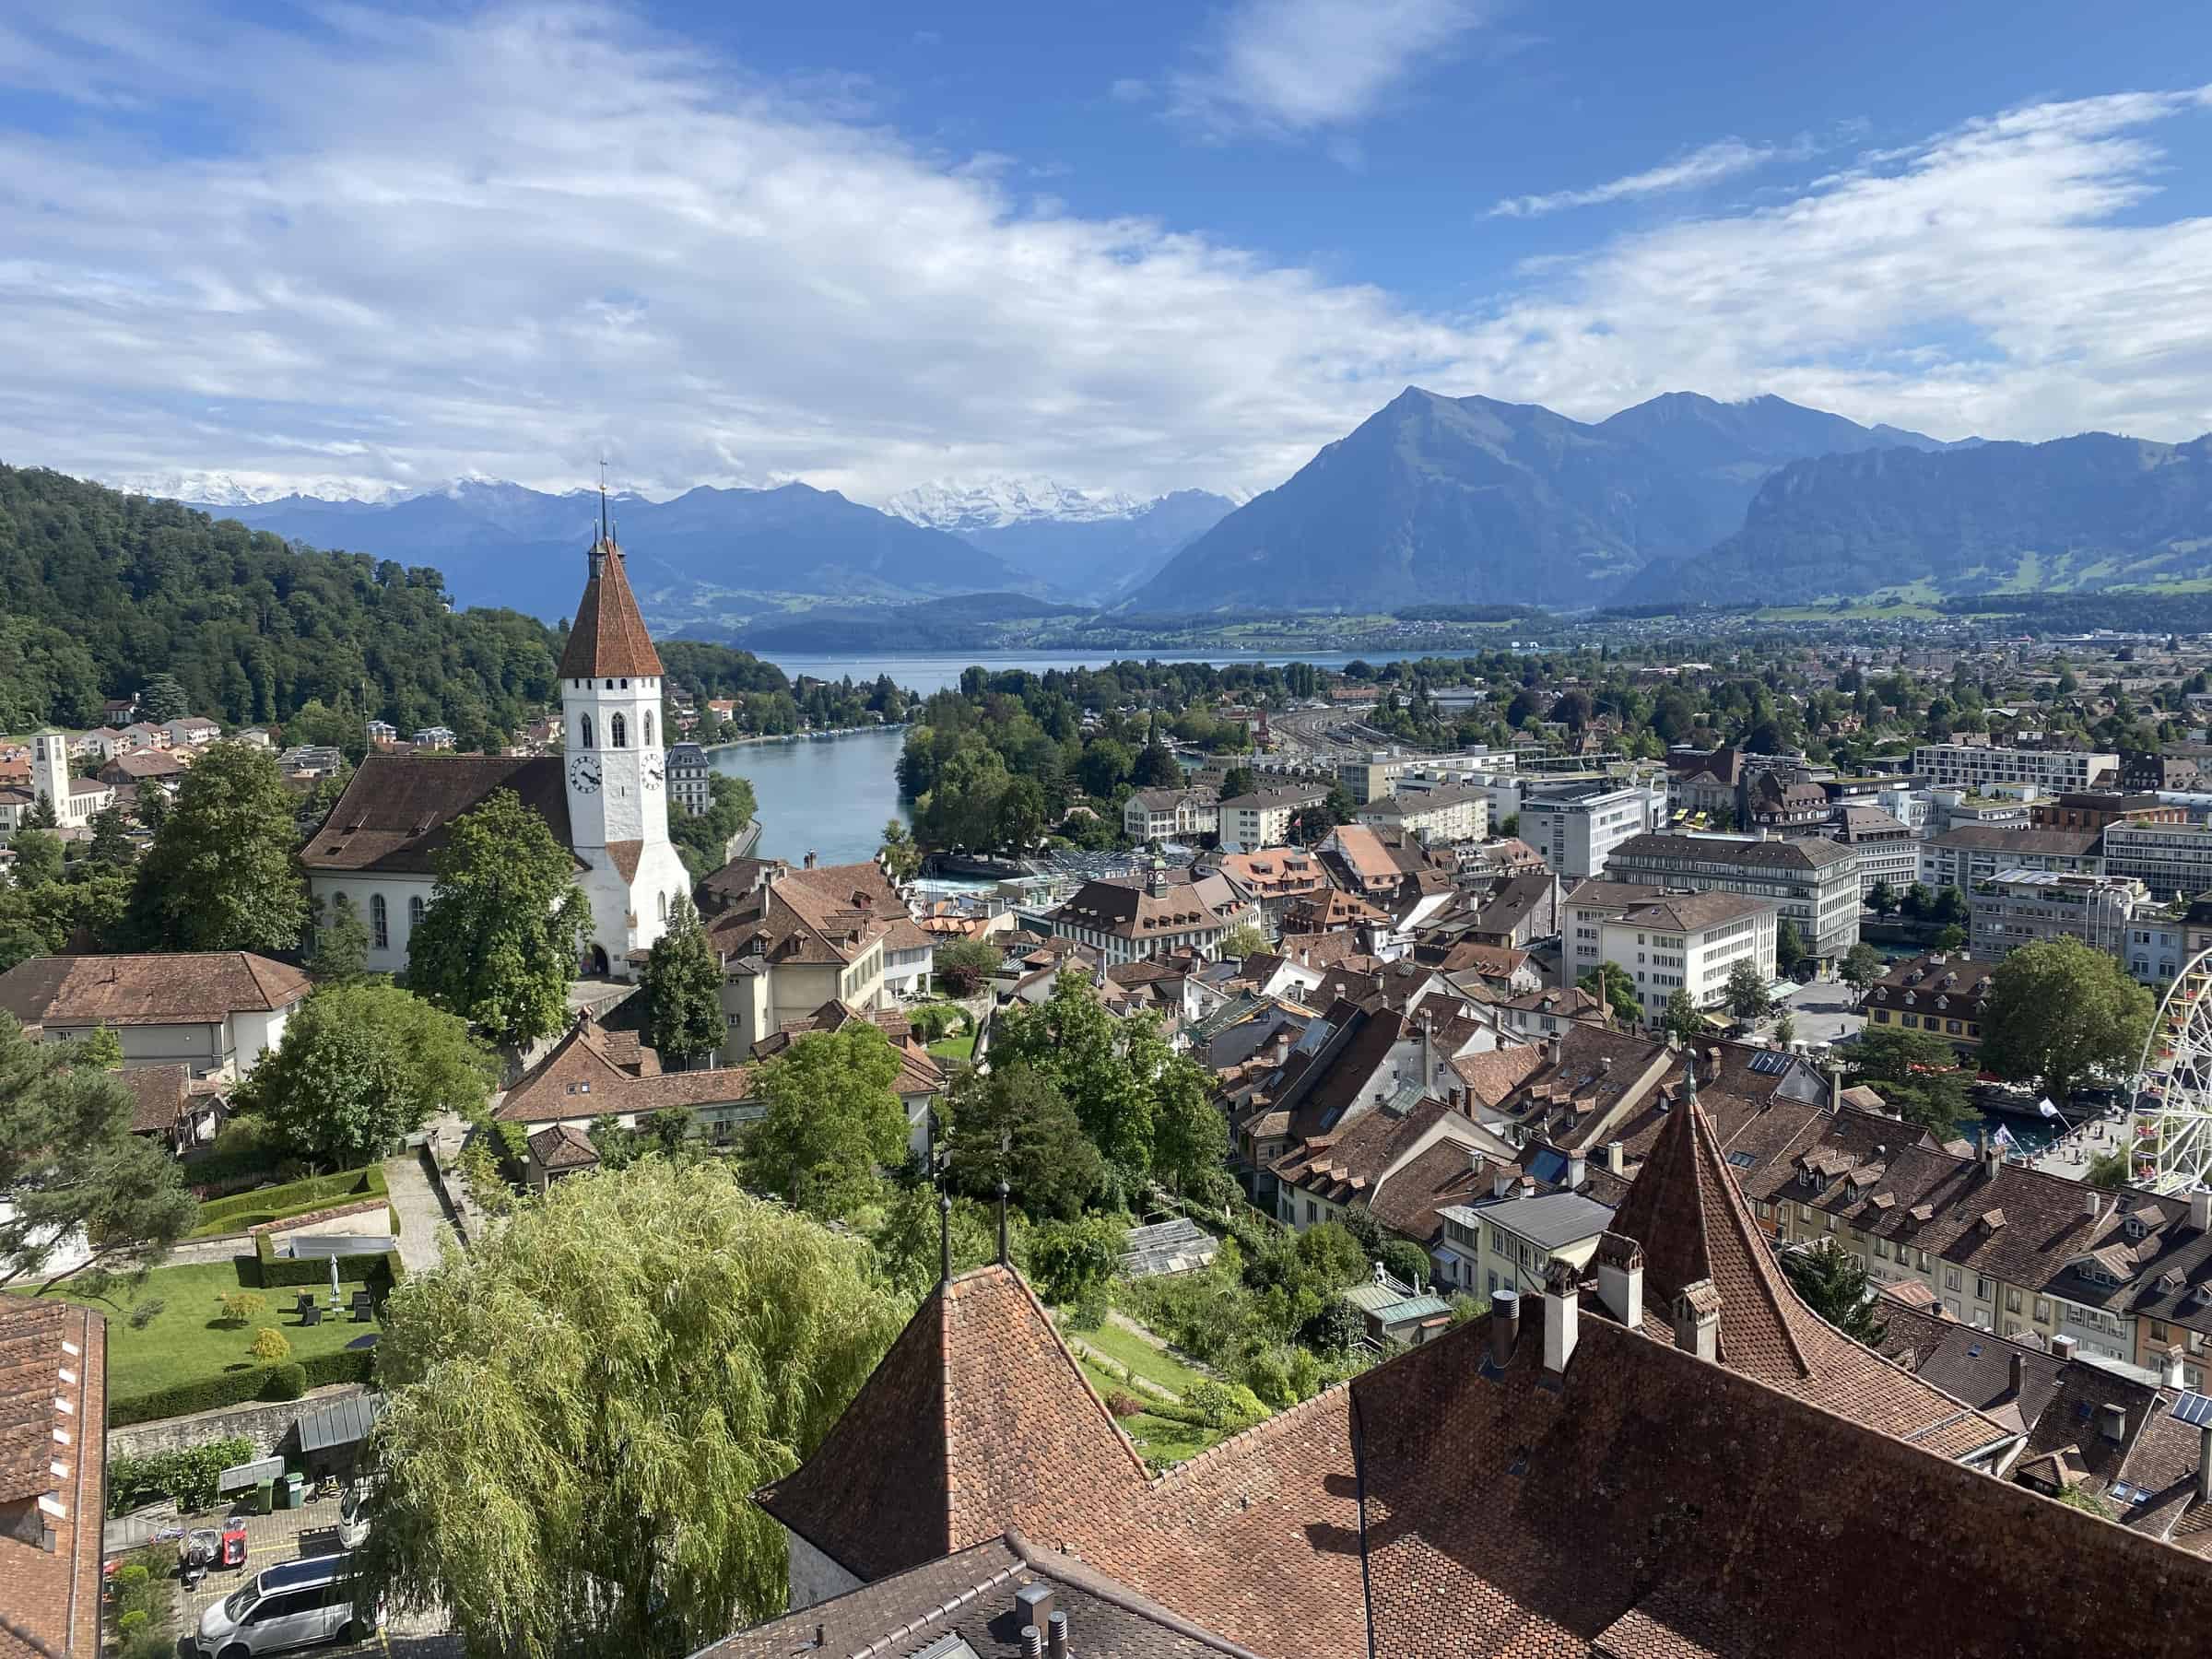 Panoramic view of Thun, Switzerland, with the historic Scherzligen Church in the foreground, overlooking the serene blue waters of Lake Thun, framed by the Swiss Alps in the distance on a partly cloudy day